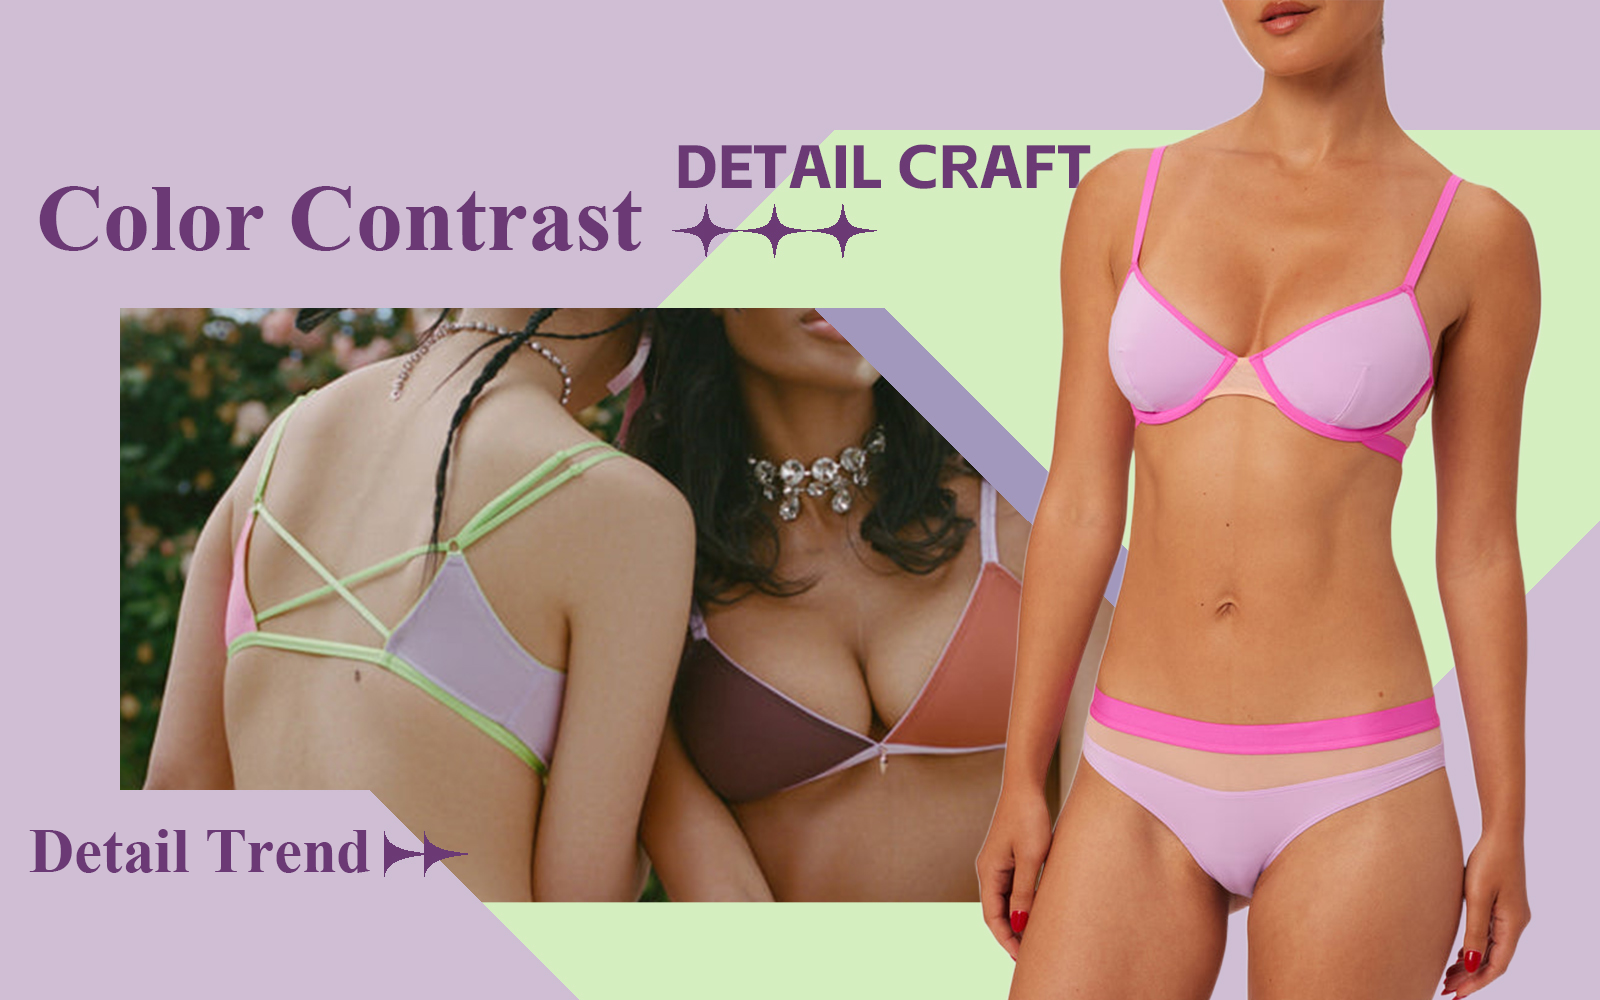 Color Contrast -- The Detail & Craft Trend for Women's Lingerie